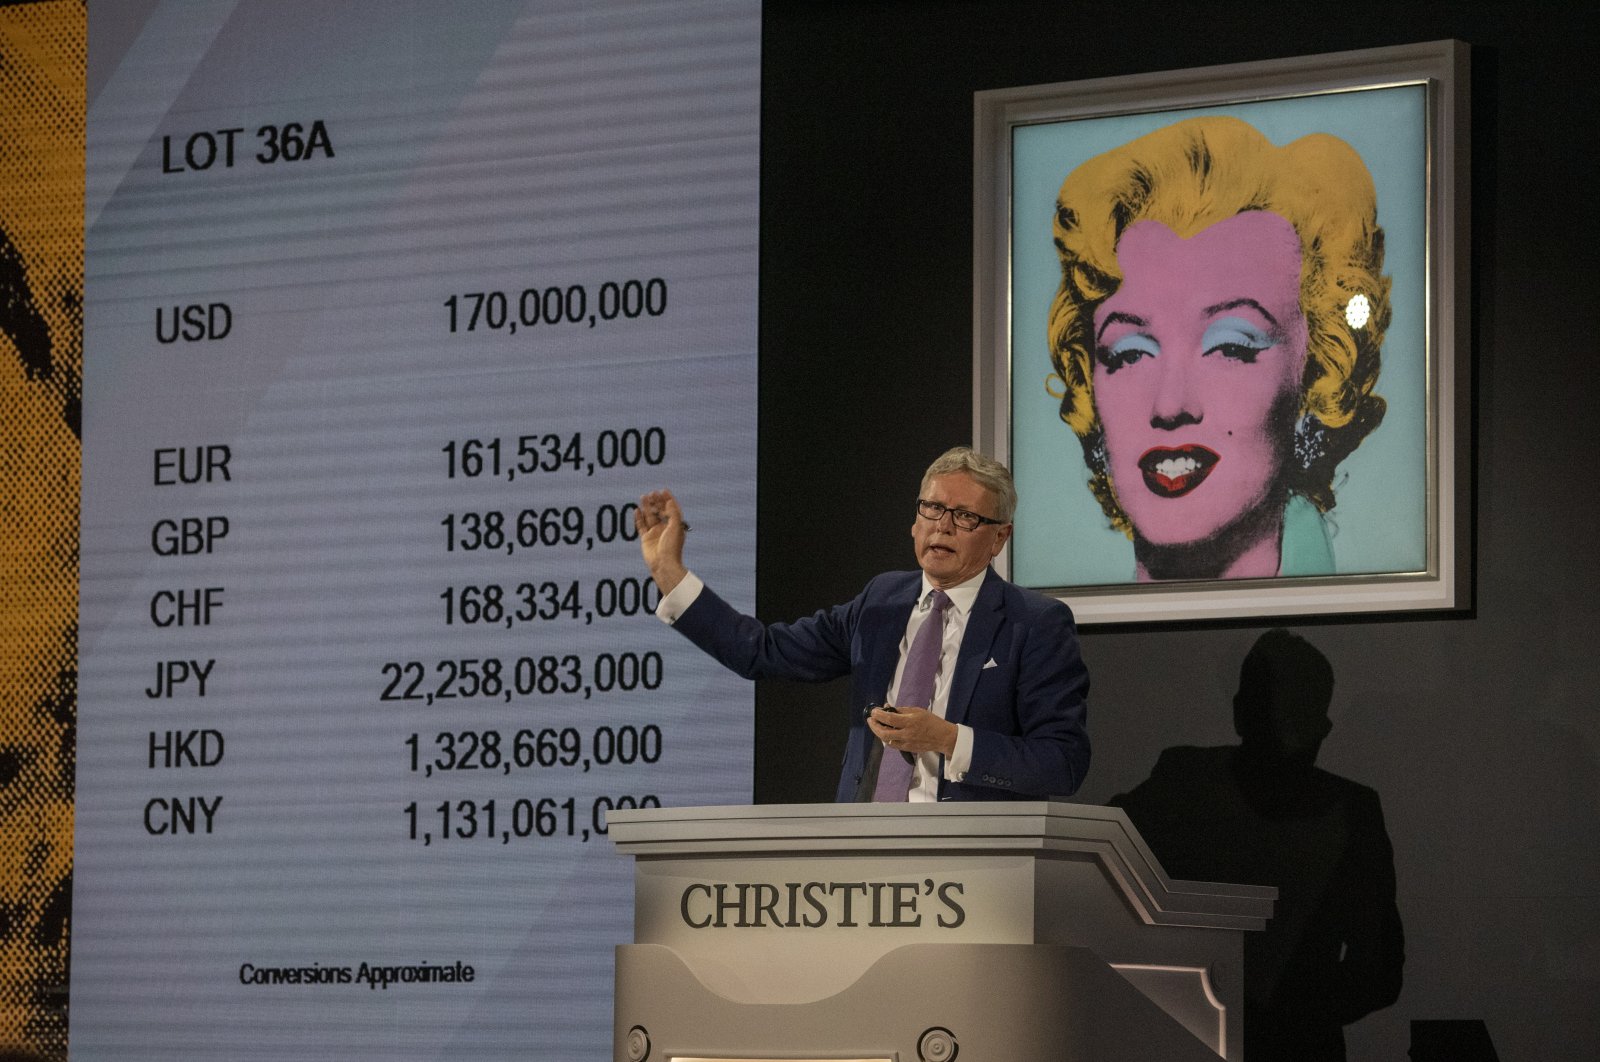 Christie&#039;s auctioneer ends the auction of &quot;Shot Sage Blue Marilyn&quot; by Andy Warhol for $170 million dollars during an Evening Sale of works from the Collection of Thomas and Doris Amman at Christie&#039;s Auction House in New York, U.S., May 9, 2022. (EPA Photo)